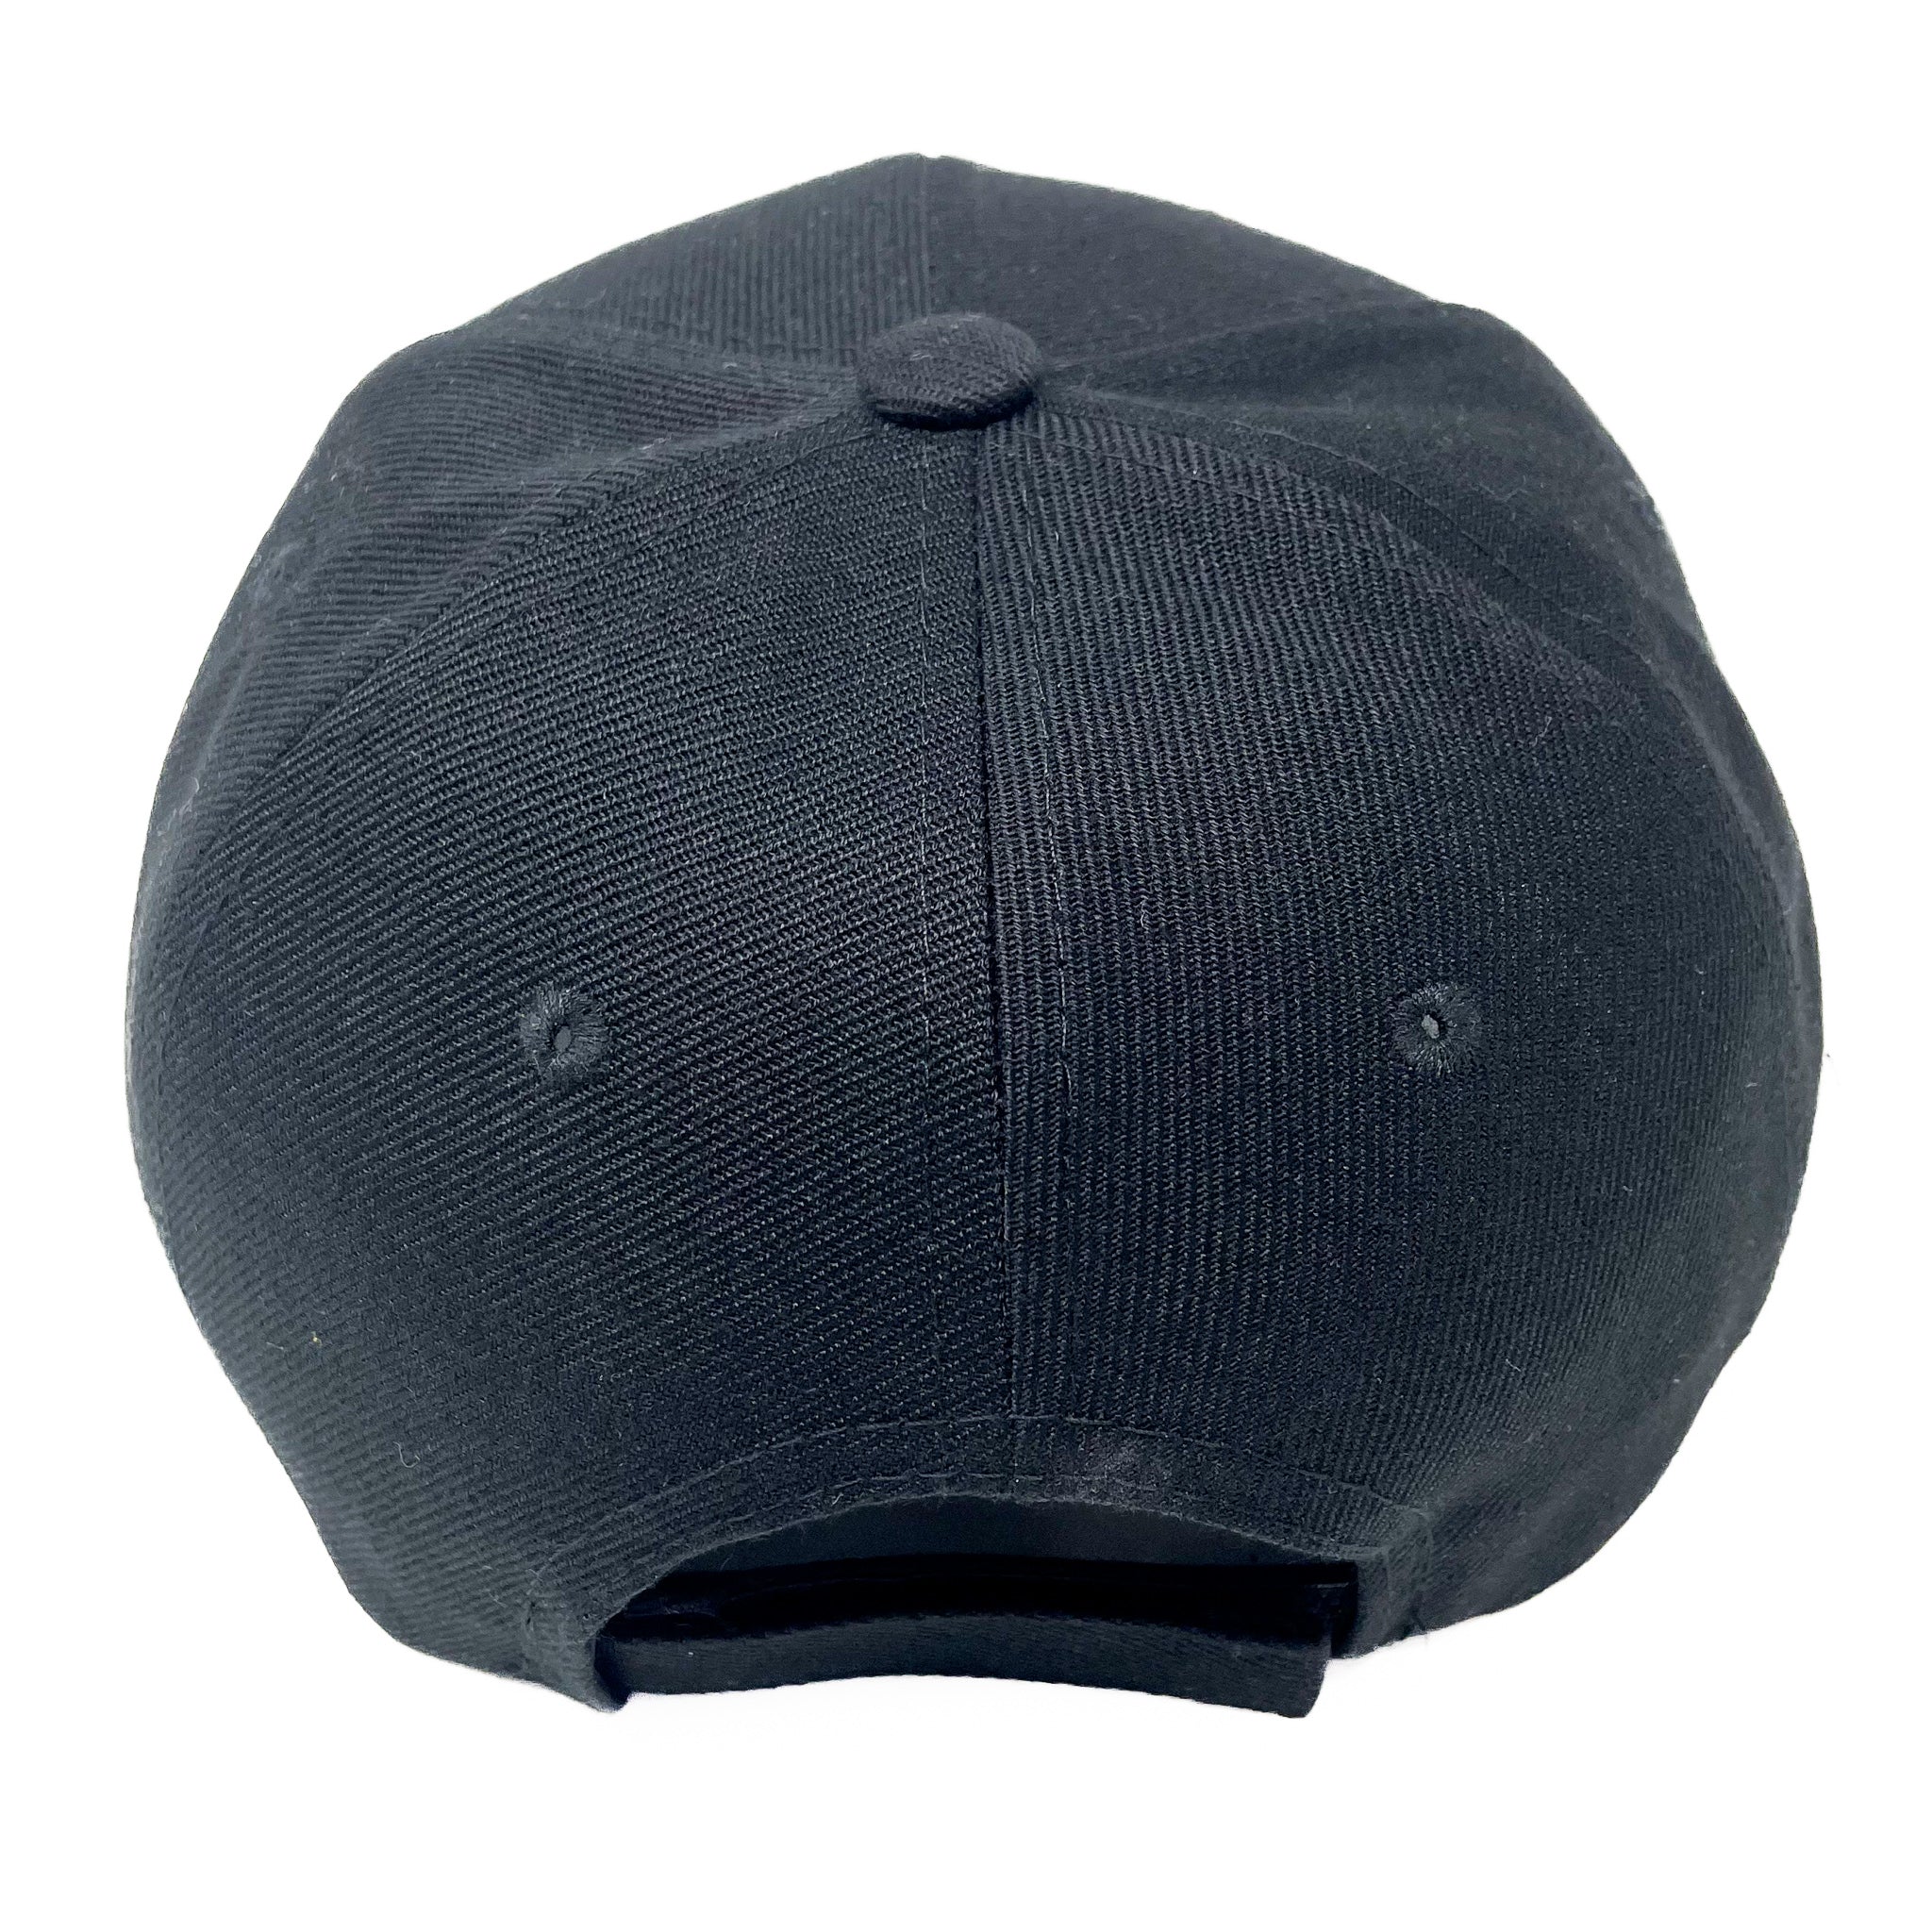 United States Space Force Hat